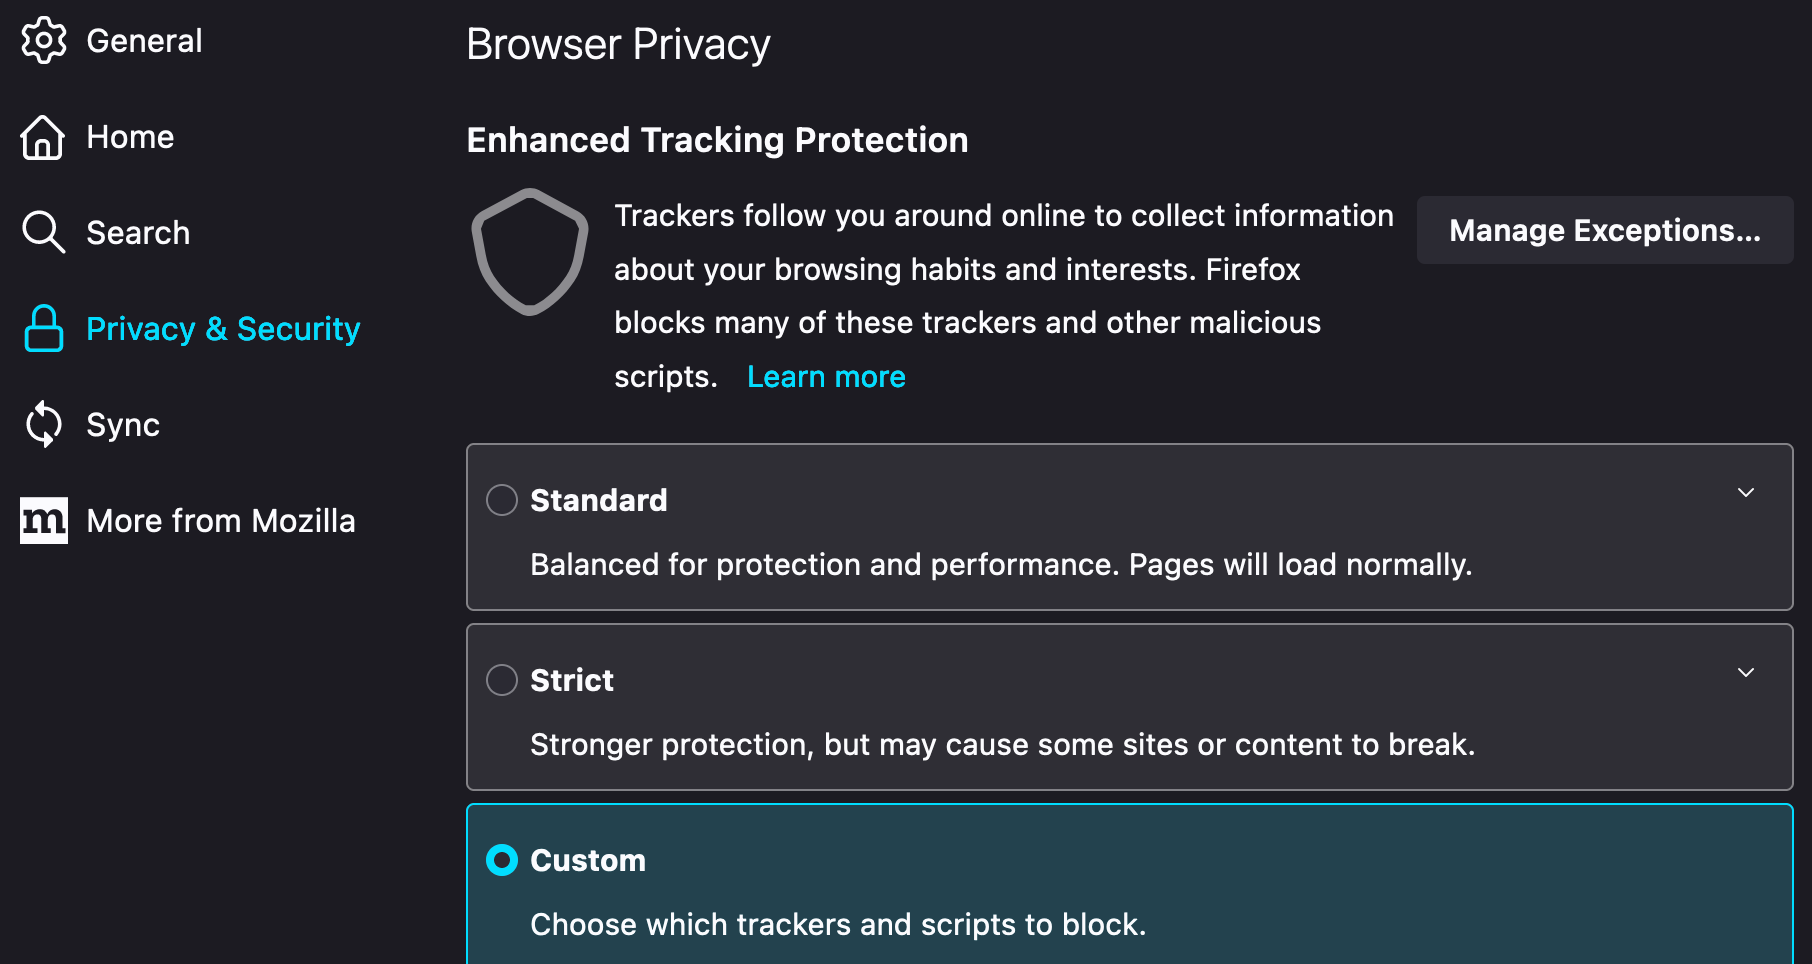 A screenshot of the Firefox Privacy & Security settings and the Enhanced Tracking Protection section with the Custom setting selected.